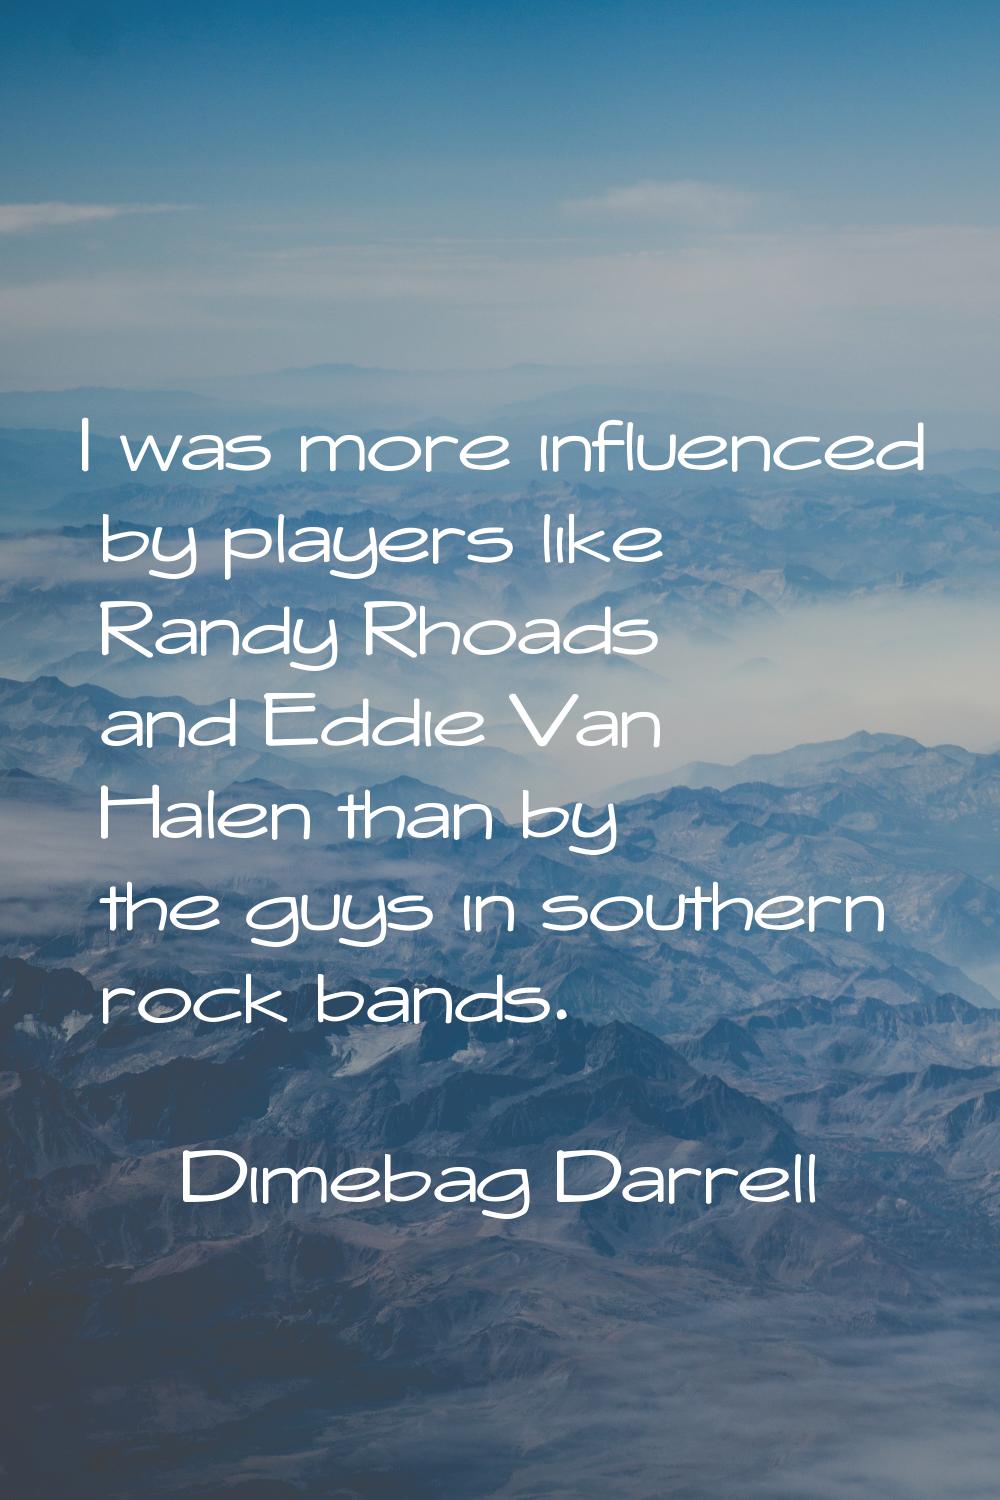 I was more influenced by players like Randy Rhoads and Eddie Van Halen than by the guys in southern